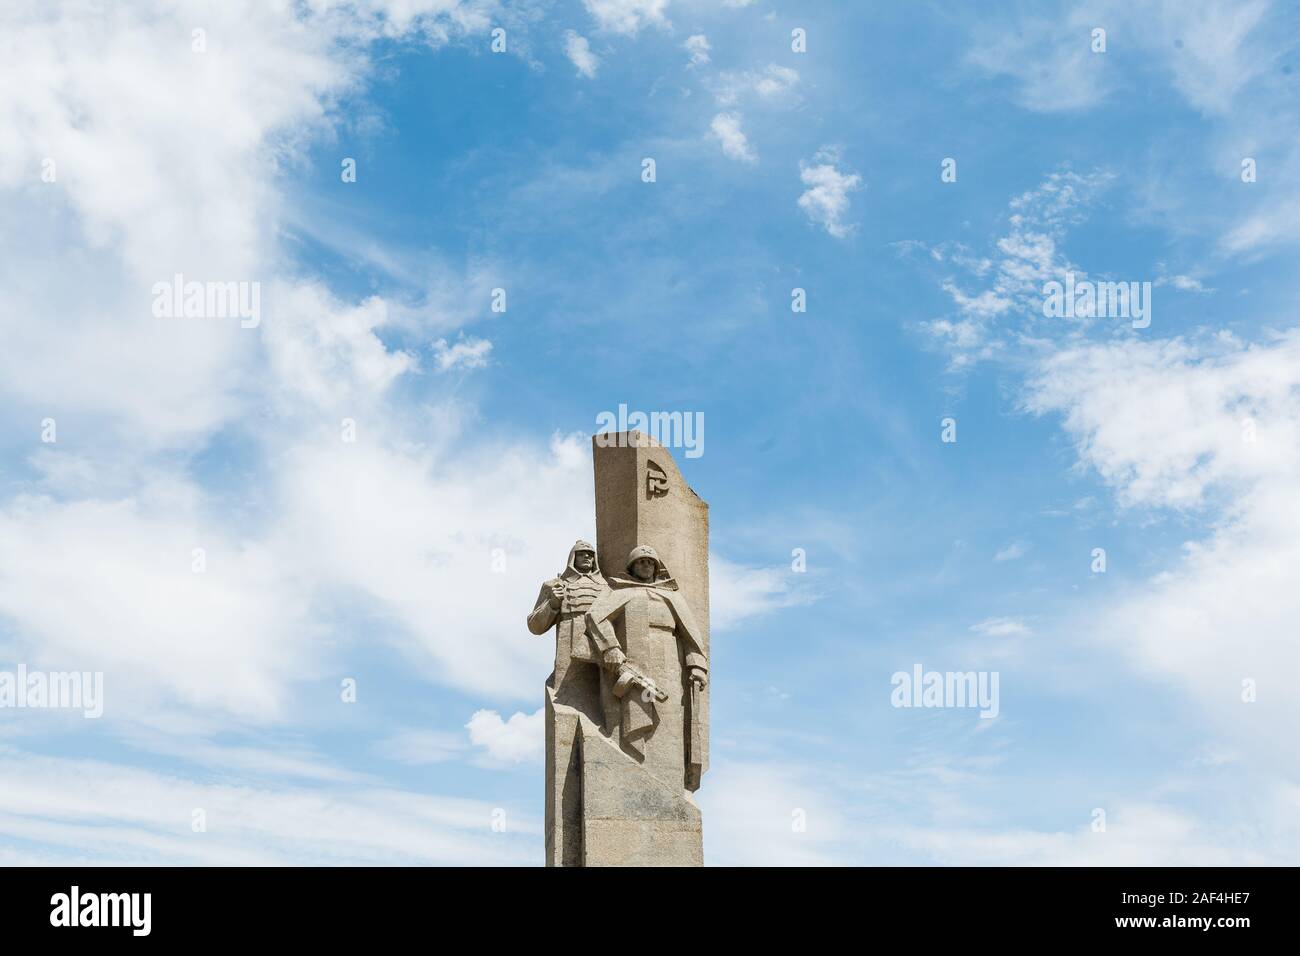 monument to mothers and children of war military stalingrad, Volzhsky Stock Photo